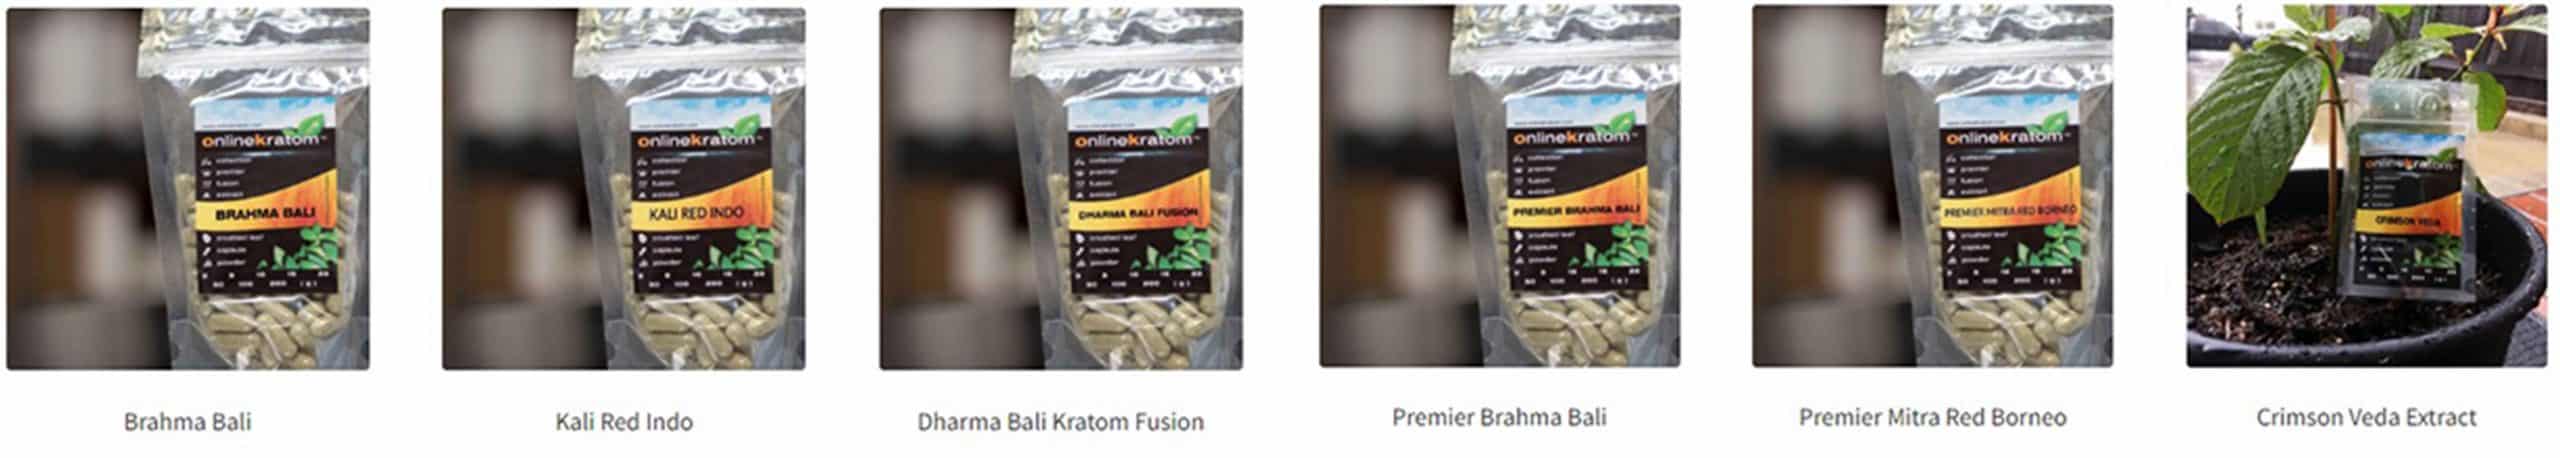 image of online kratom products